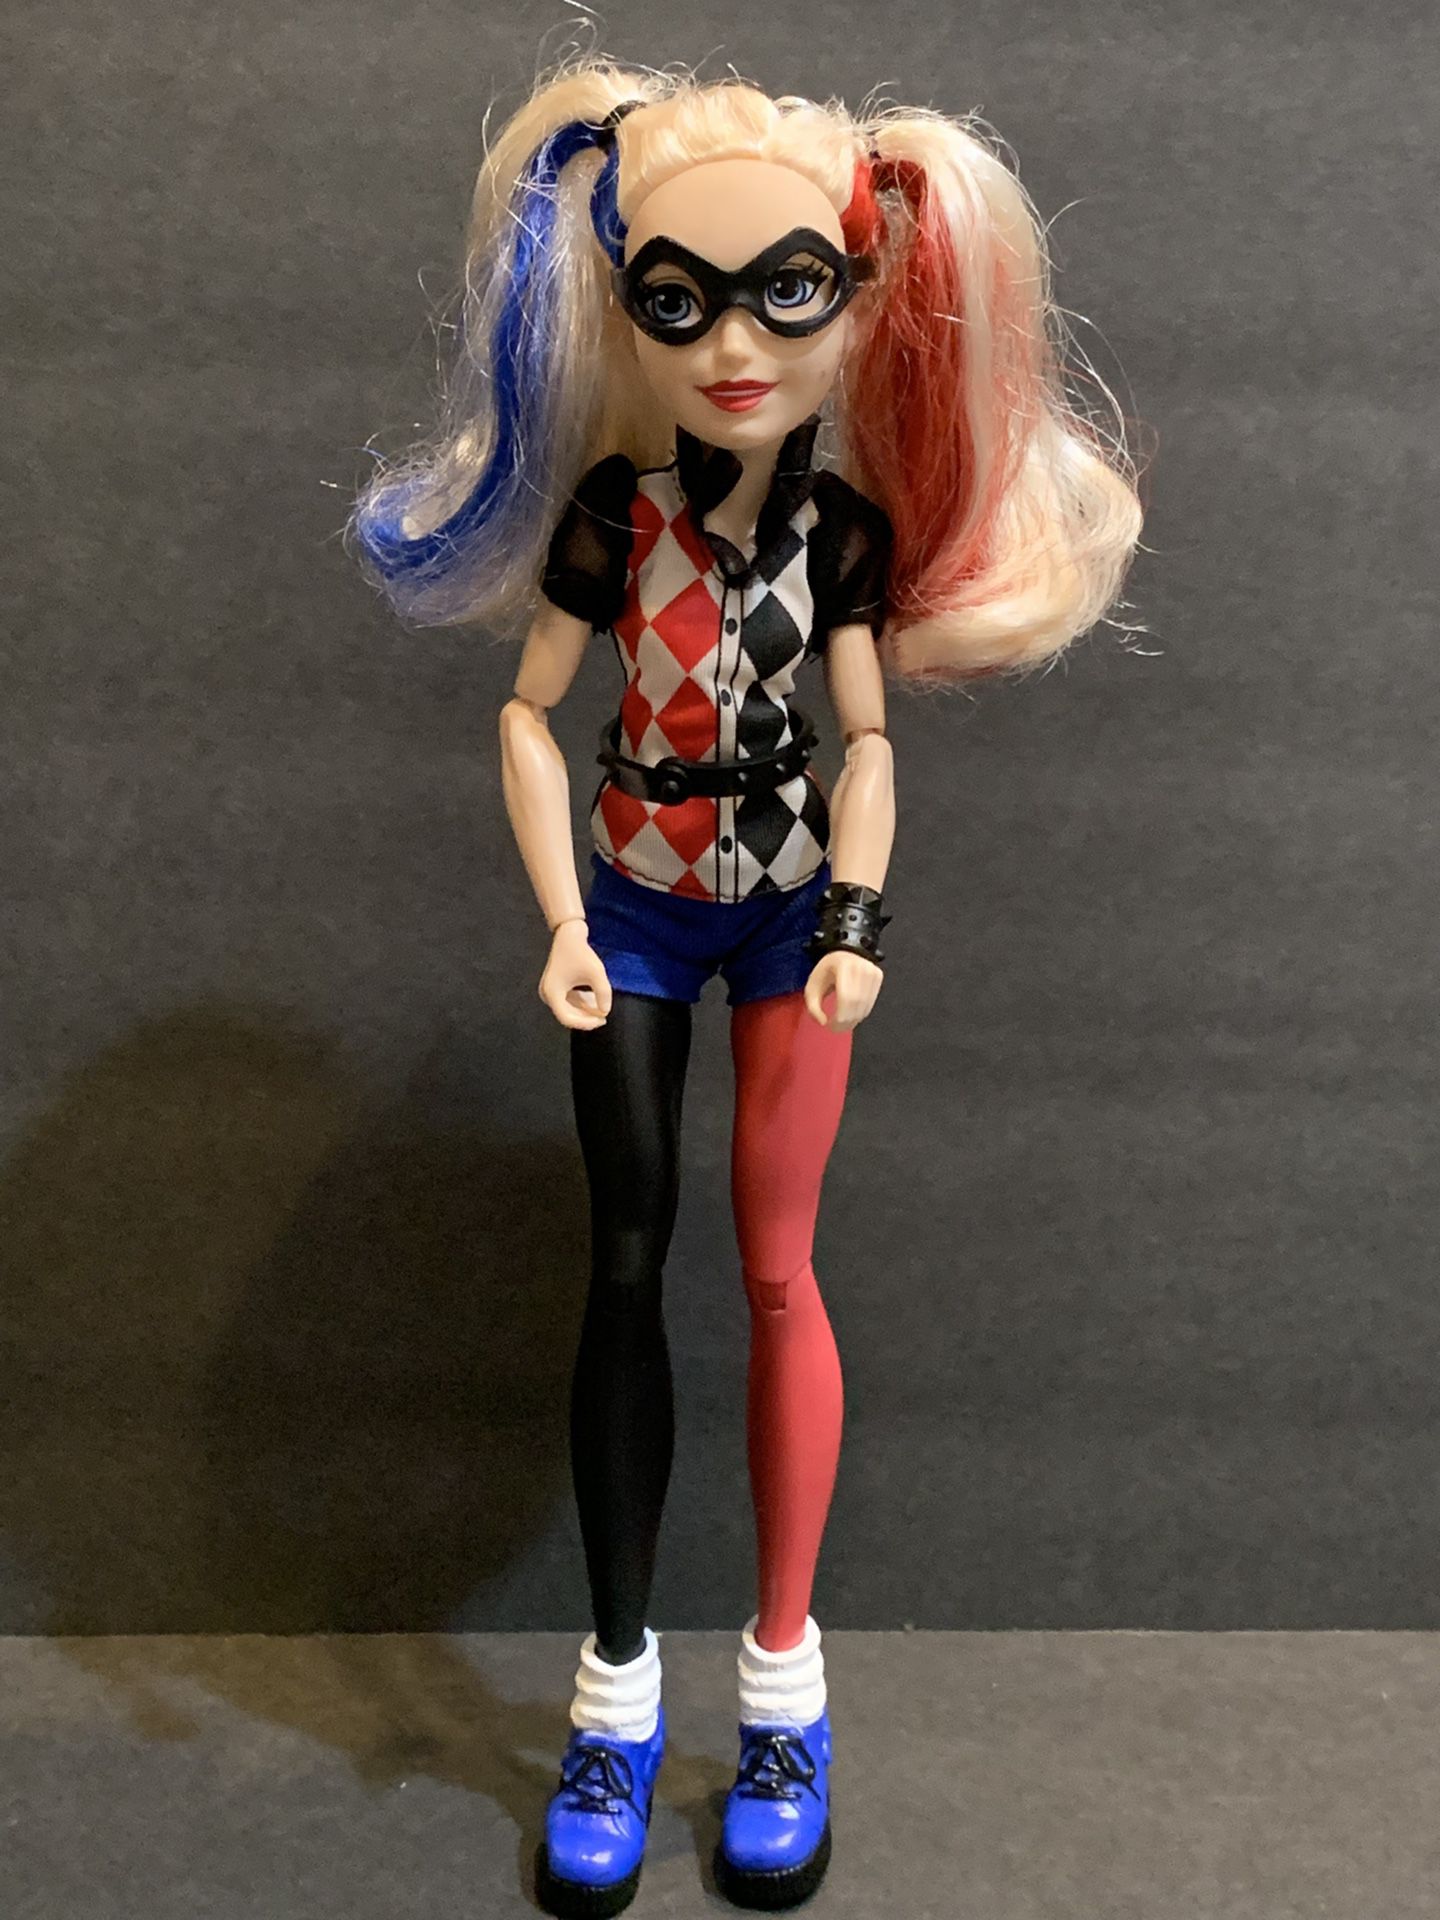 DC COMICS HARLEY QUINN 12 1/2 INCH DOLL - Excellent Condition 